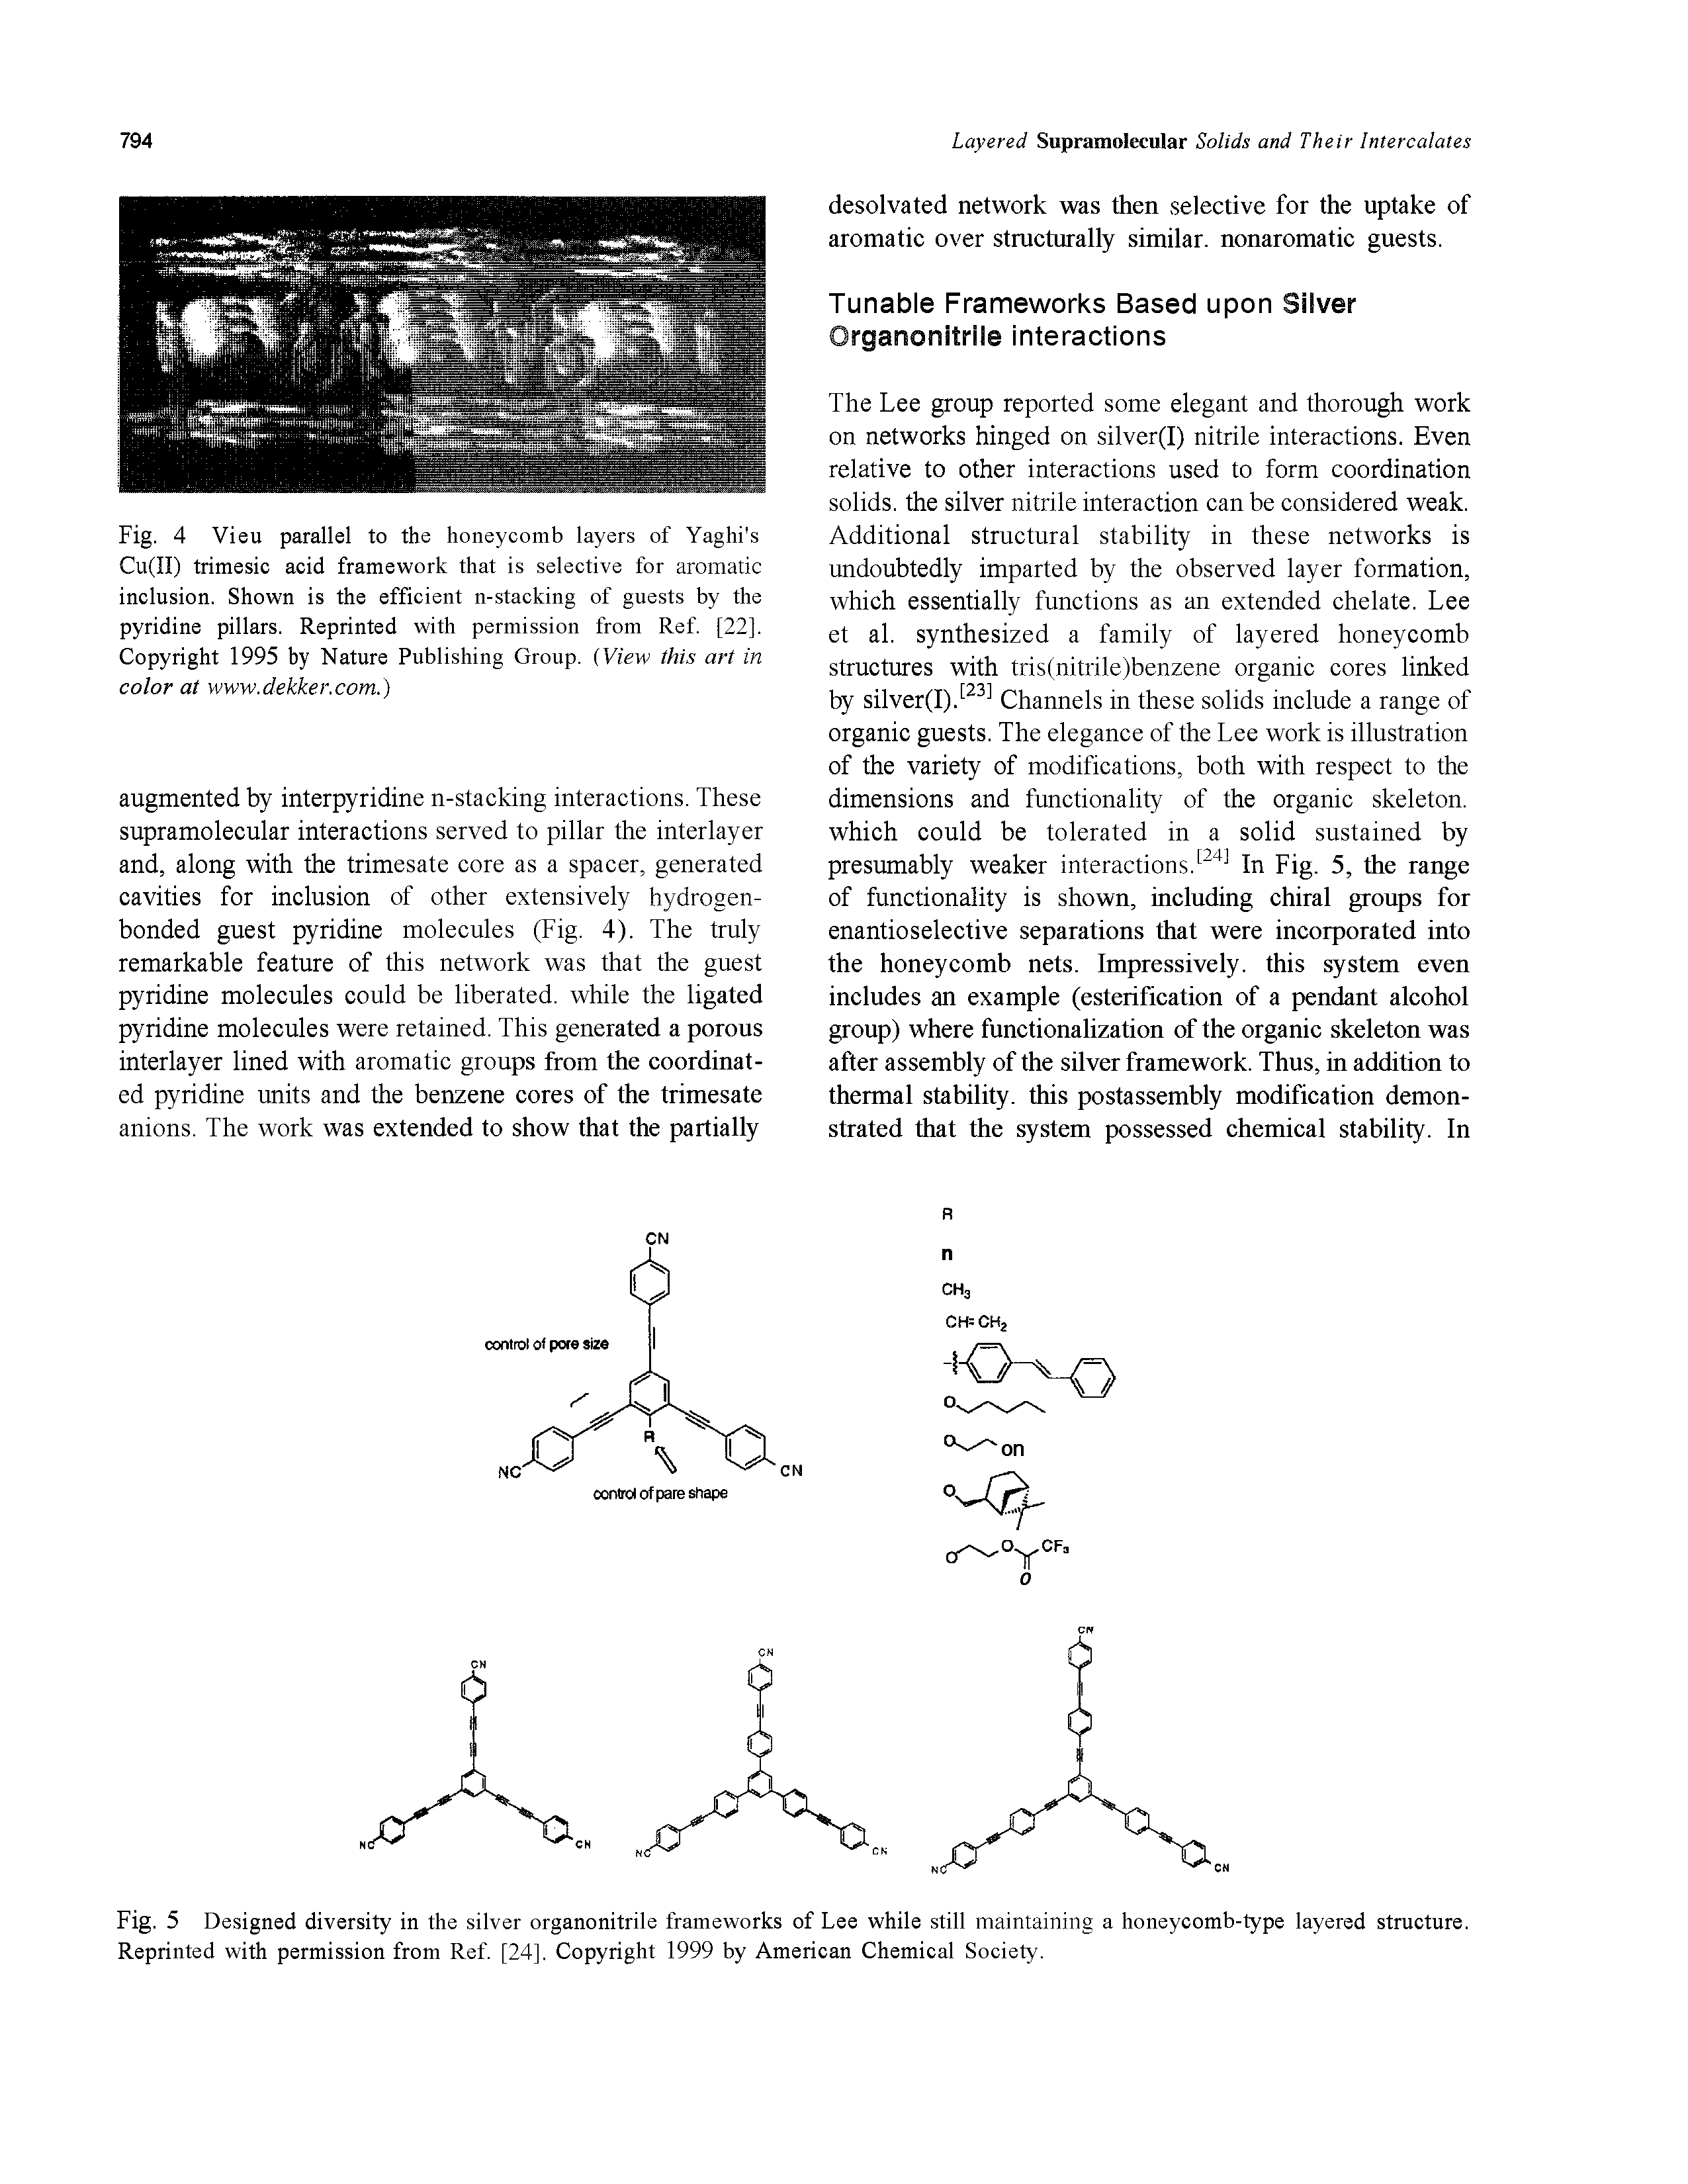 Fig. 5 Designed diversity in the silver organonitrile frameworks of Lee while still maintaining a honeycomb-type layered structure. Reprinted with permission from Ref [24]. Copyright 1999 by American Chemical Society.